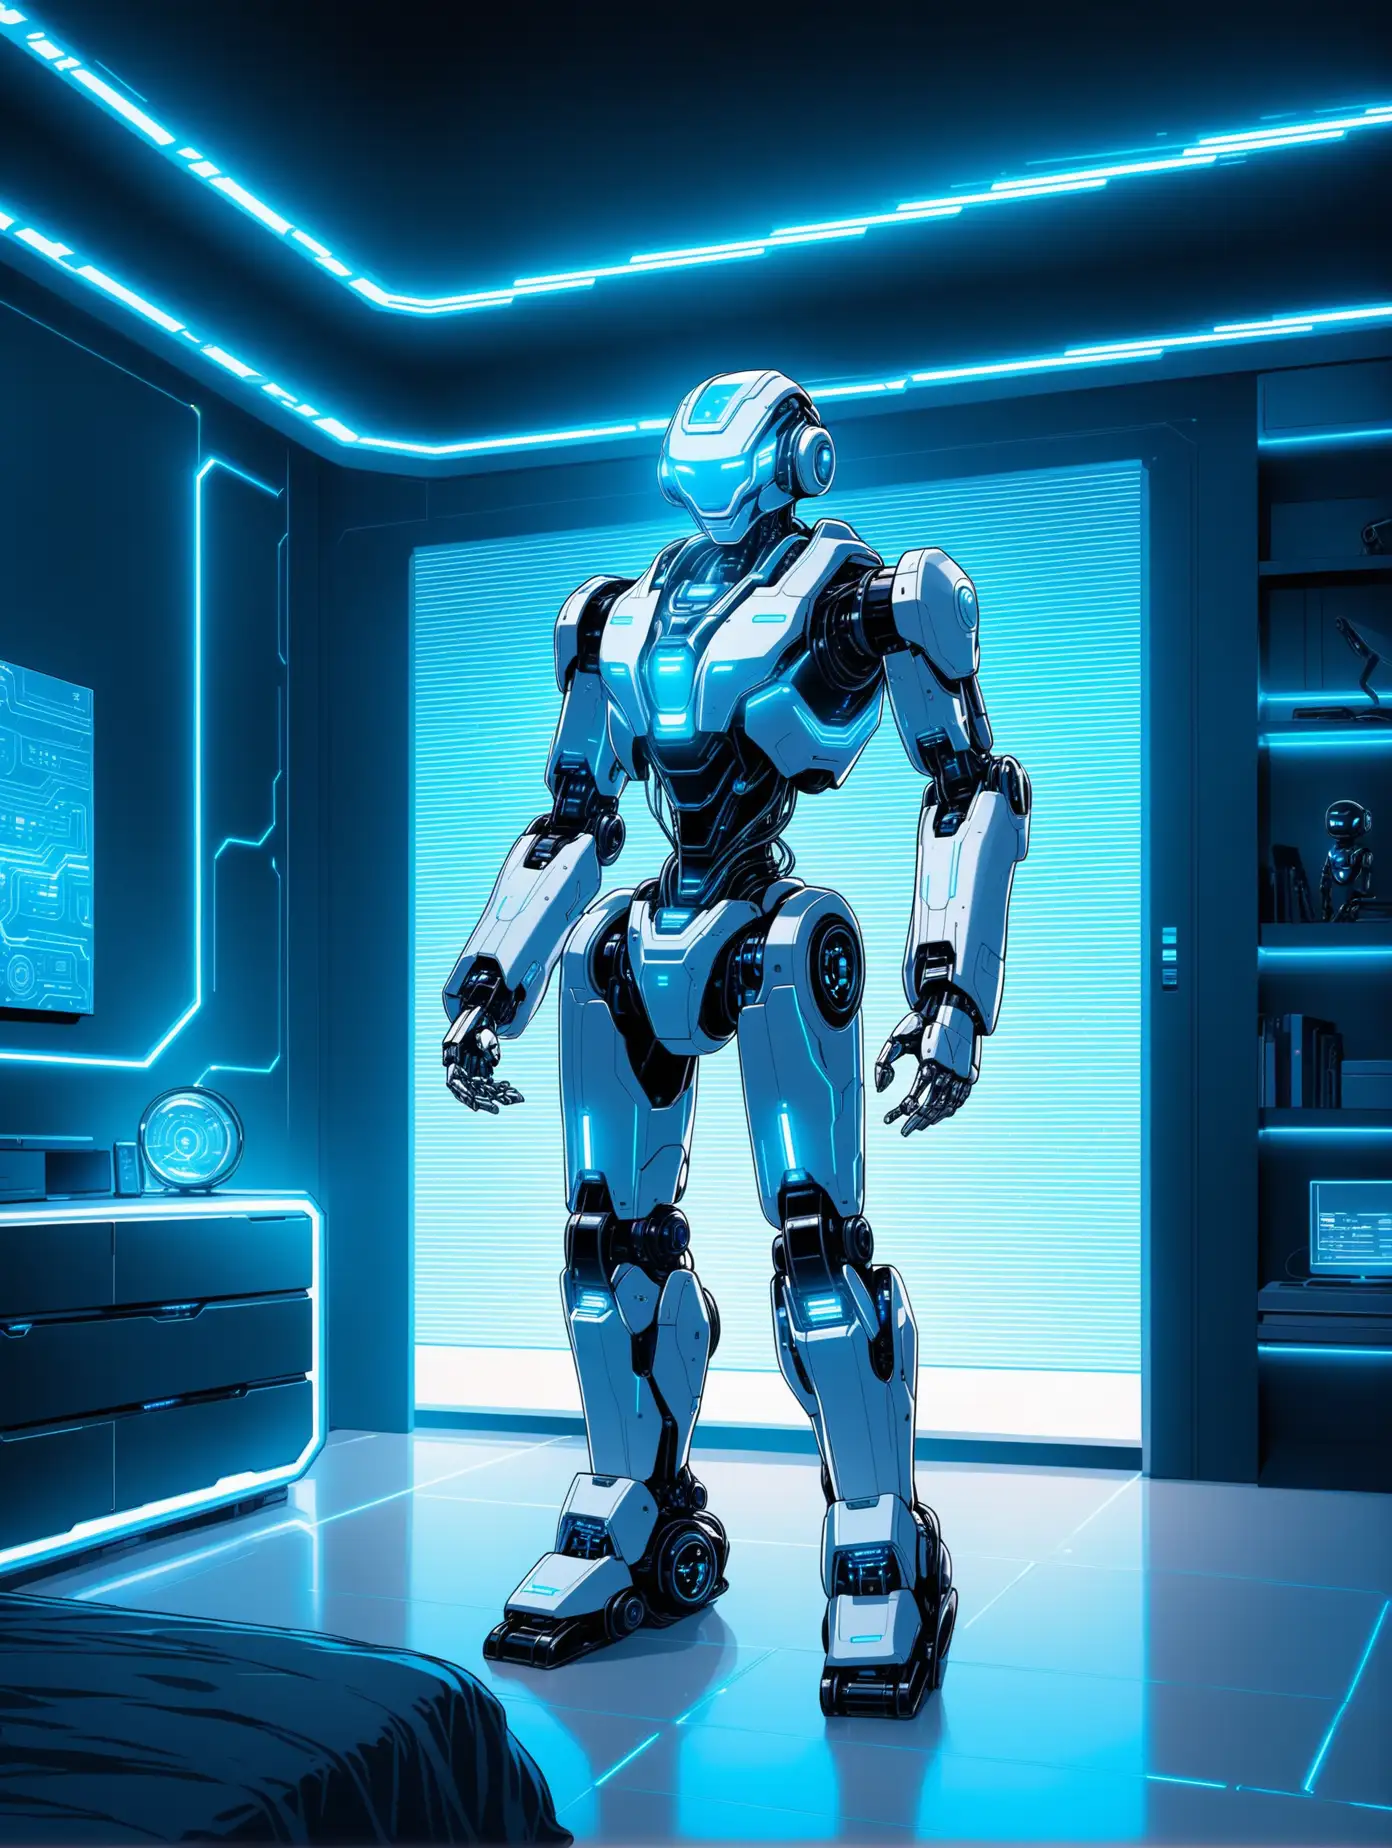 AI robot in his bedroom,
His bedroom has cool futuristic, high tech aesthetic, and blue LED lights 
backround art 